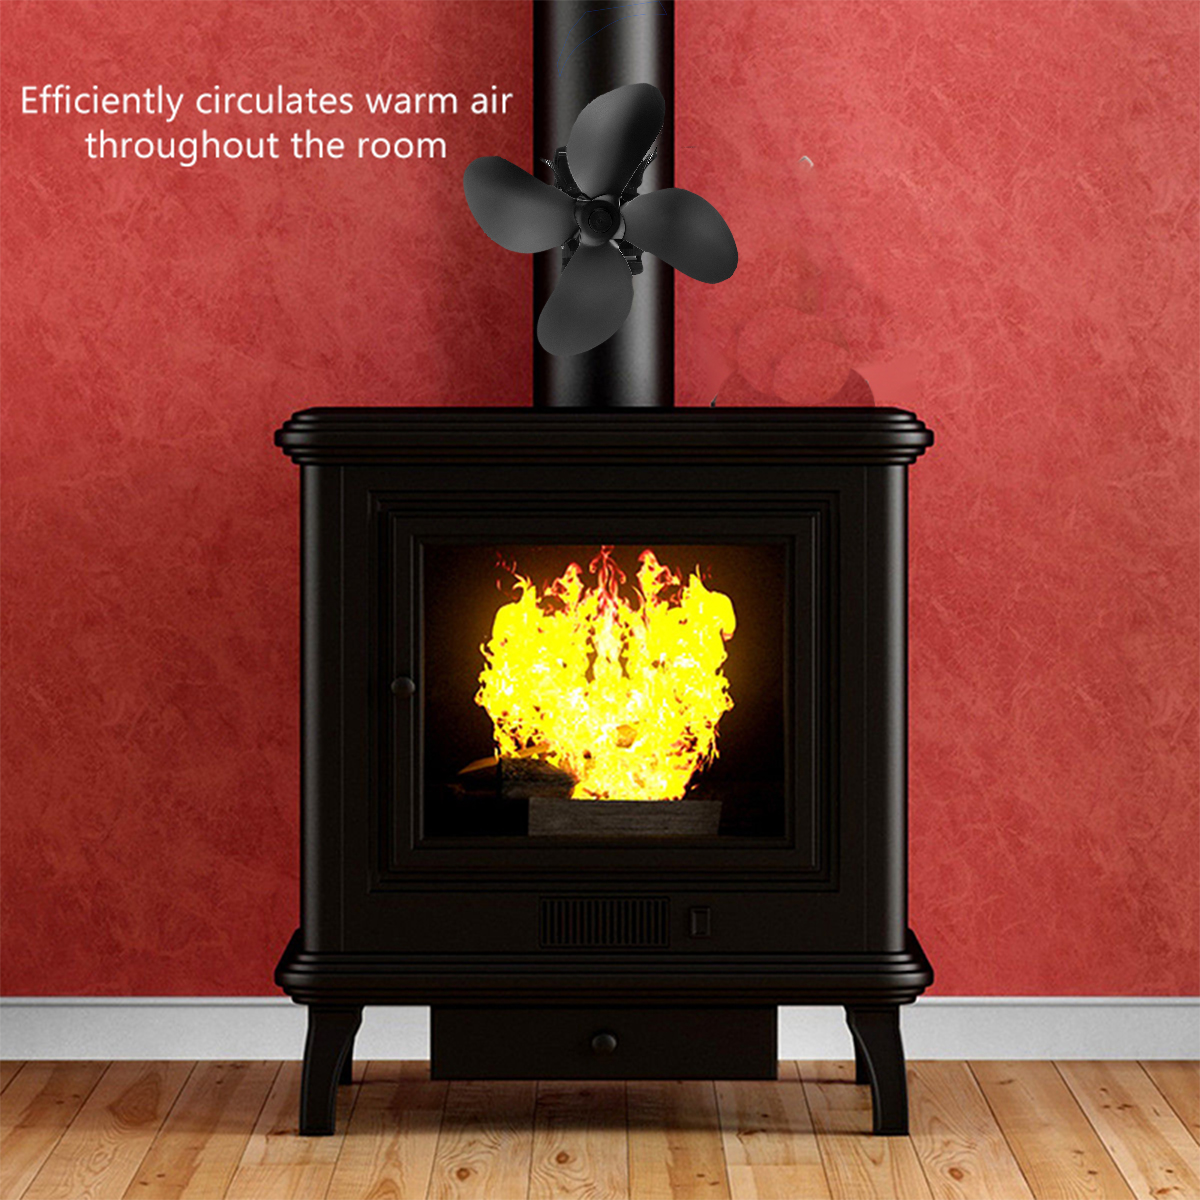 4-Blades-Heat-Powered-Stove-Fireplace-Fan-Silent-Wall-Mounted-Eco-Friendly-Heat-Circulation-Eco-Fan-1621288-7